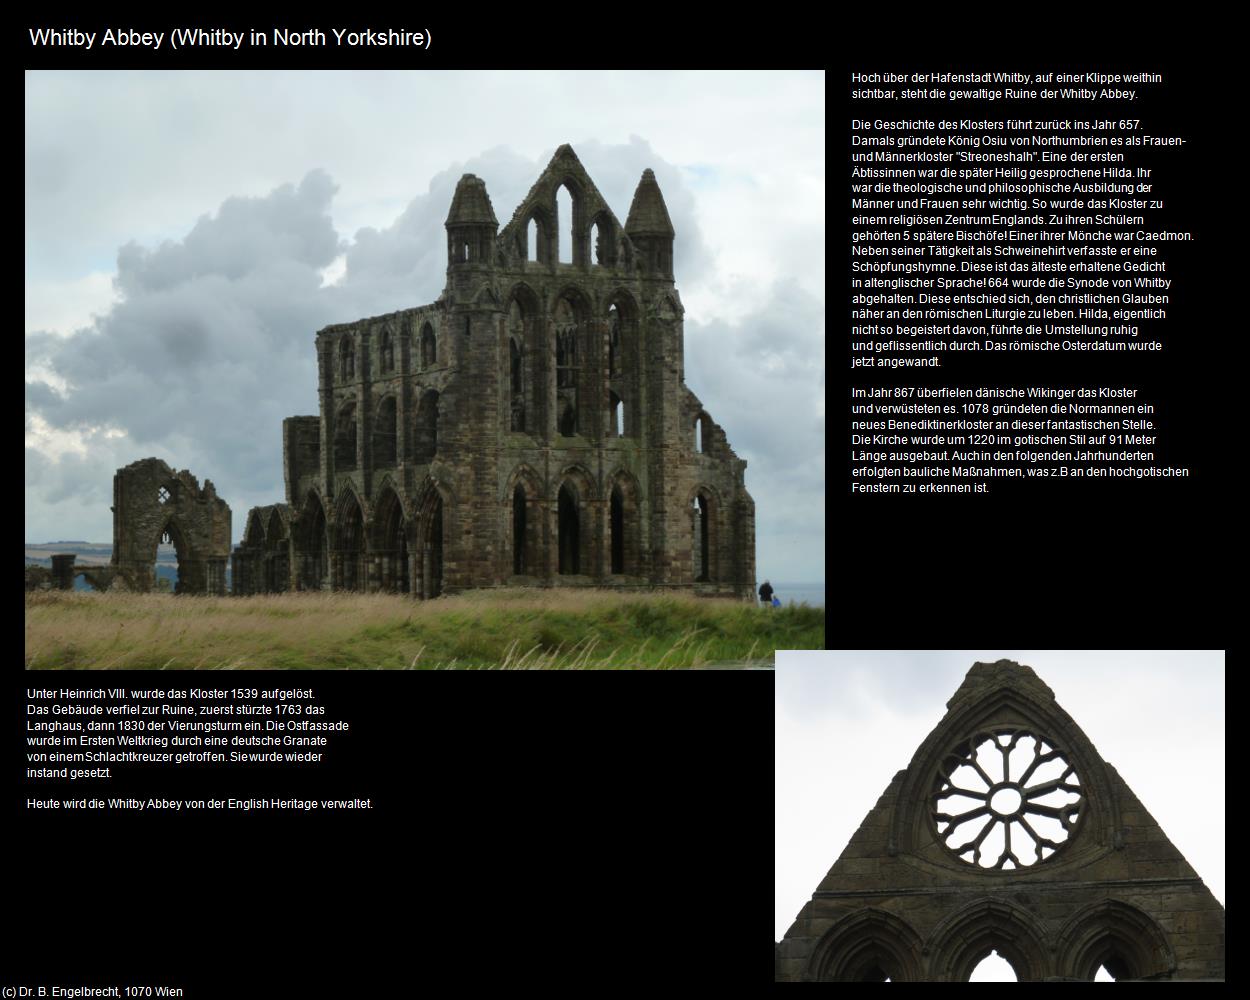 Whitby Abbey  (Whitby in North Yorkshire, England  ) in Kulturatlas-ENGLAND und WALES